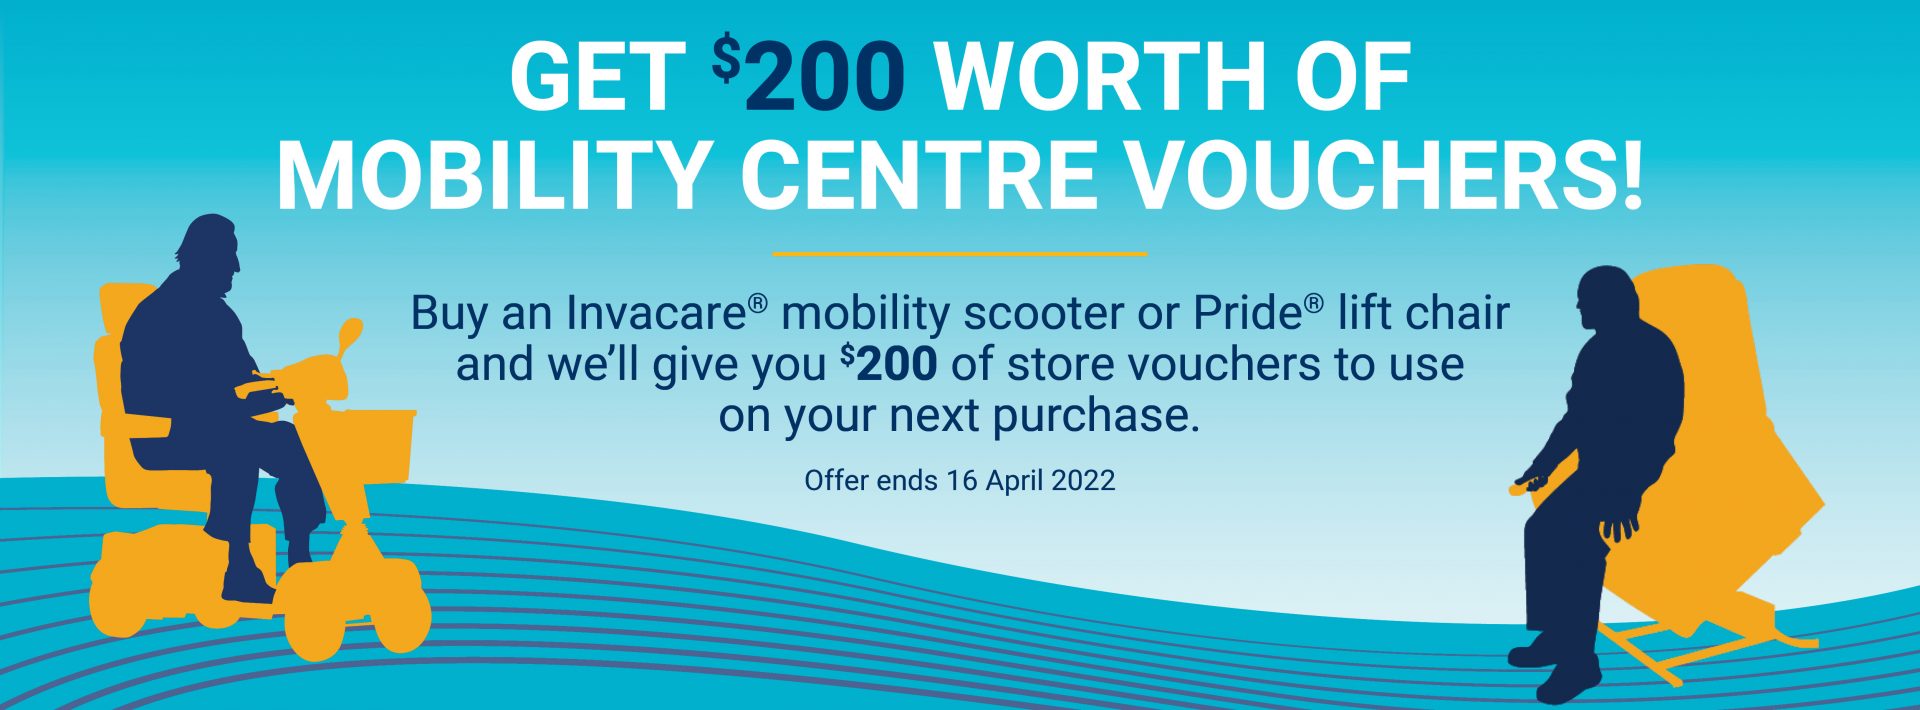 Get $200 worth of mobility centre vouchers! Buy and Invacare mobility scooter or Pride lift chair and we'll give you $200 of store vouchers to use on your next purchase.  Offer ends 16 April 2022